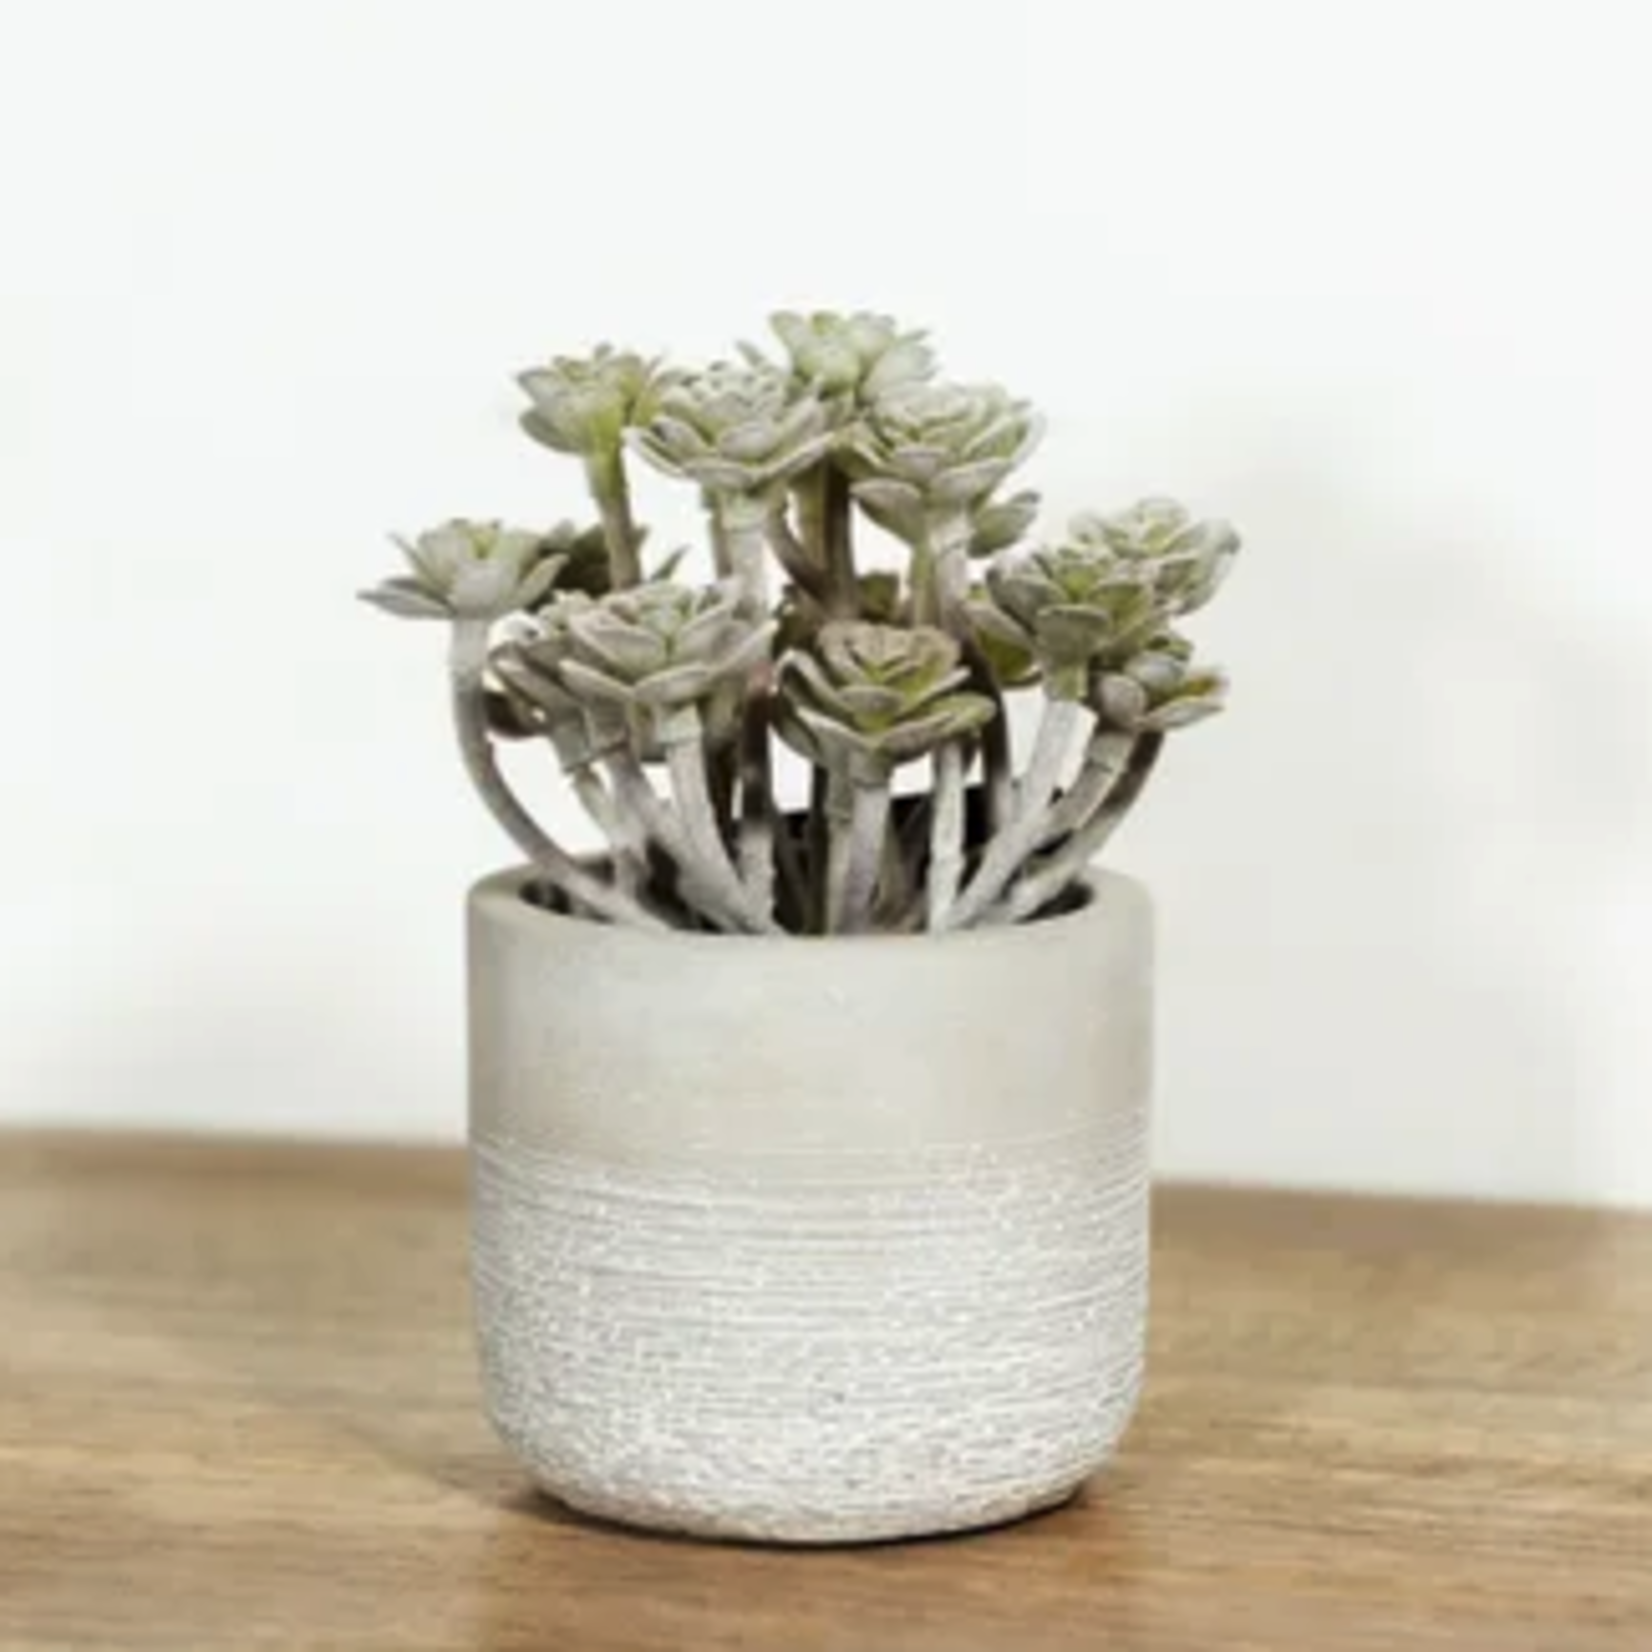 Outside The Box 5" Faux Succulent In Gray Cement Pot